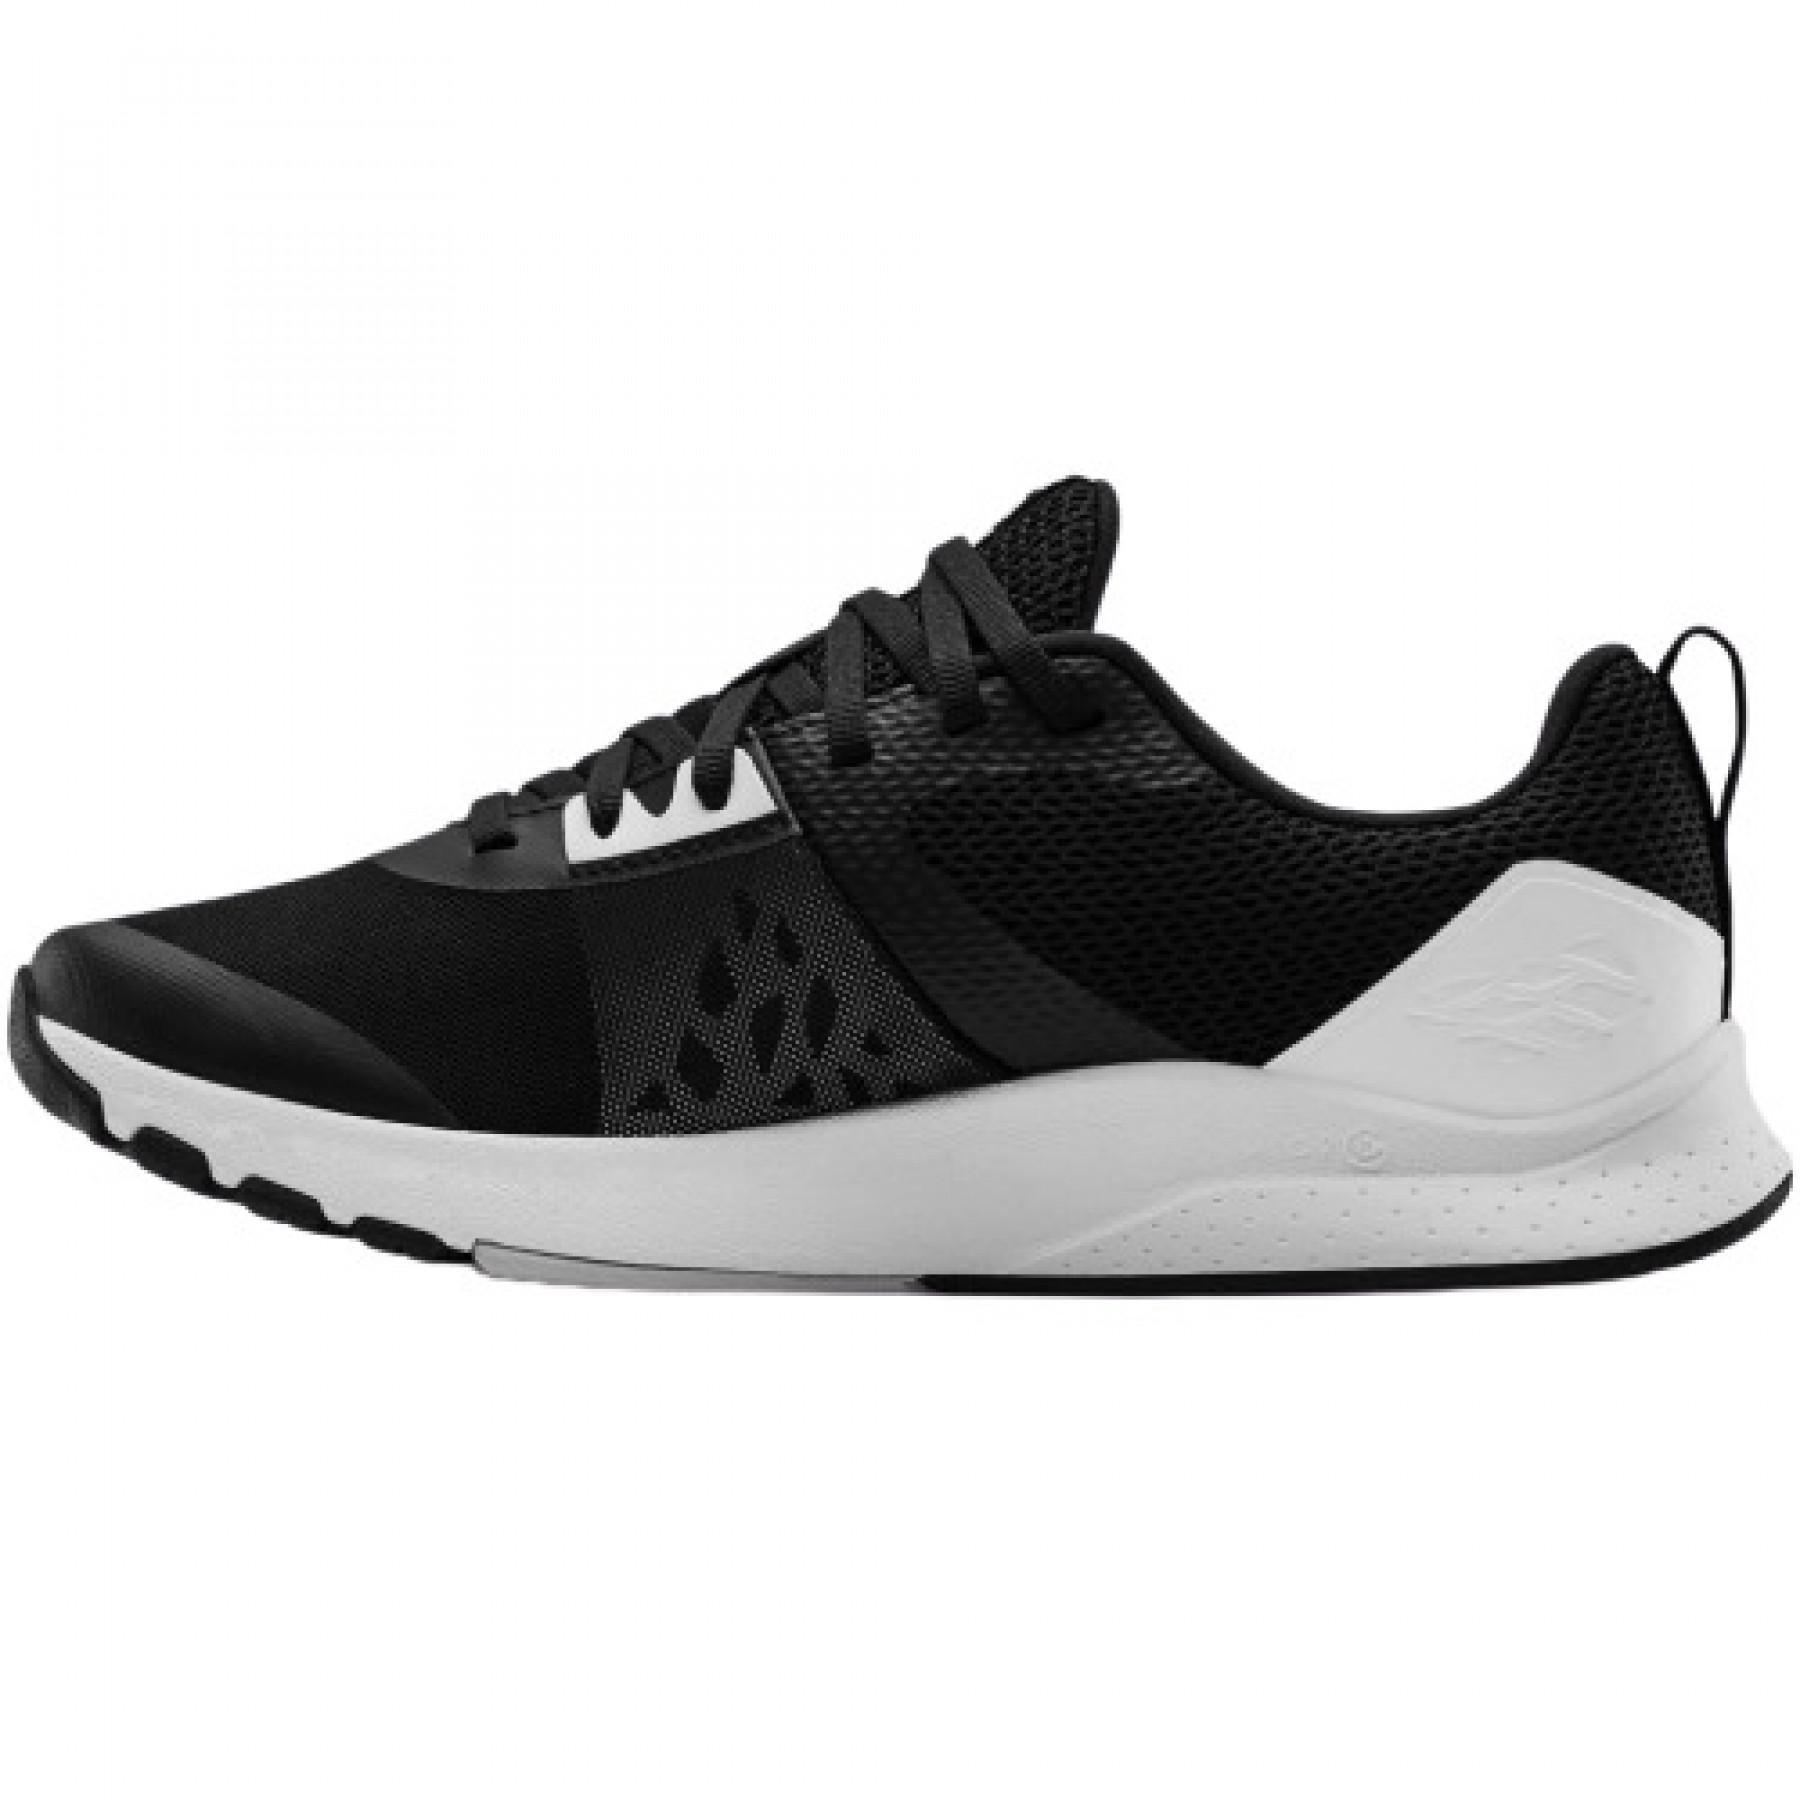 Chaussures femme Under Armour TriBase™ Edge